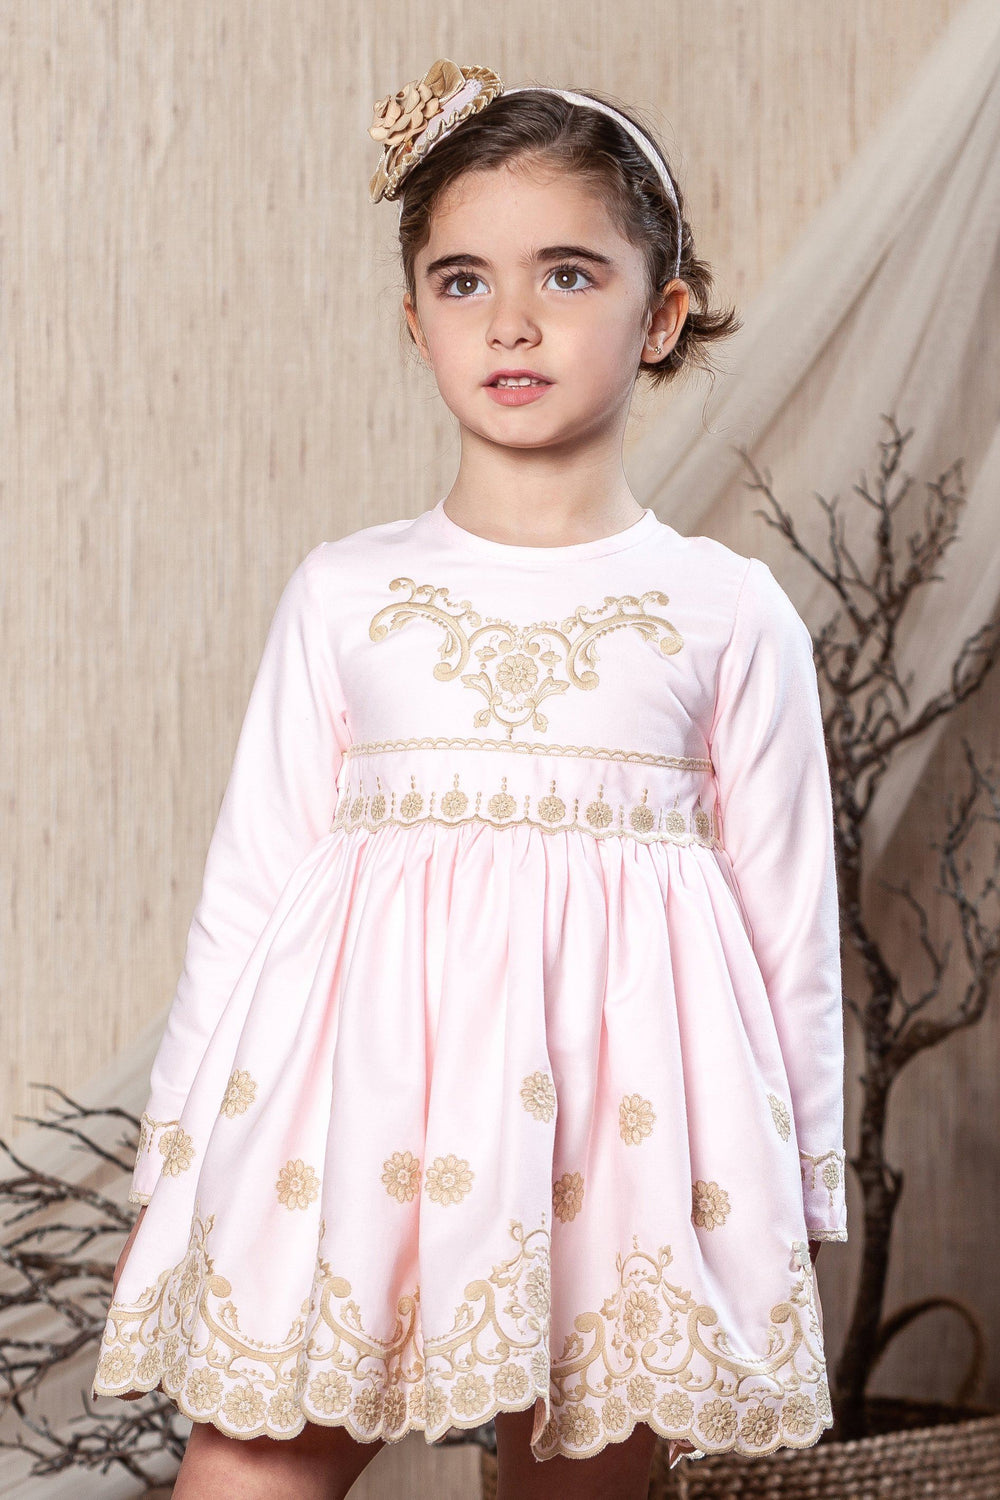 Abuela Tata "Catalina" Pink & Beige Lace Dress | Millie and John